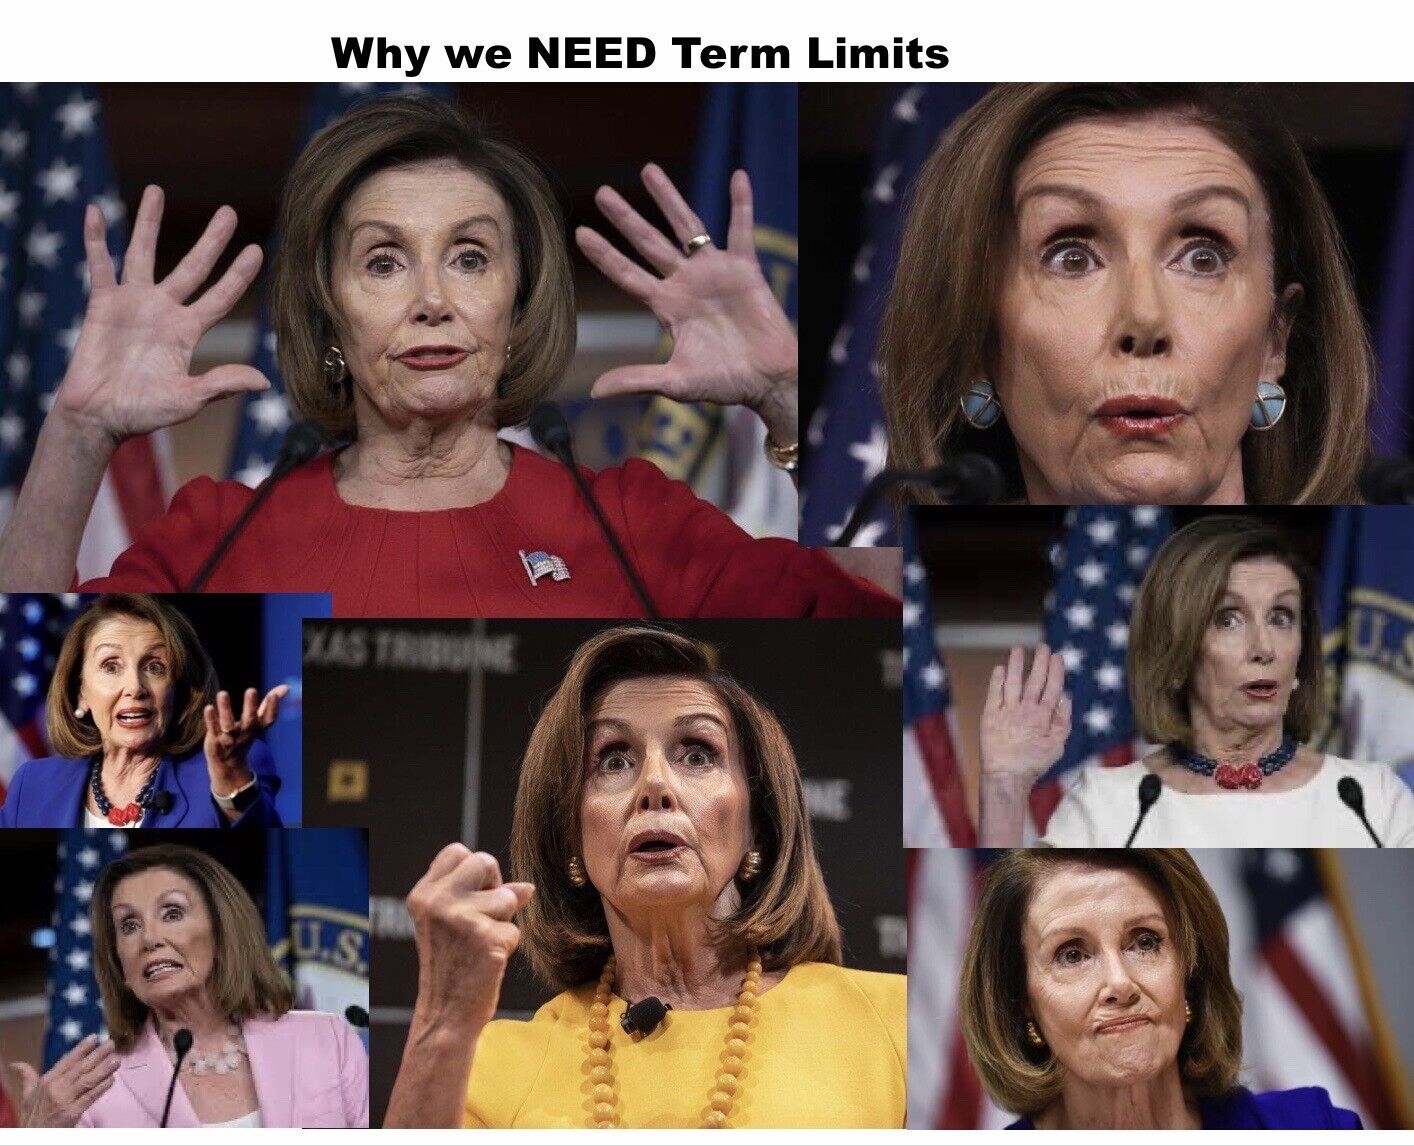 Term Limits: Nancy Pelosi Photo Collage - “Why We Need TERM LIMITS in Congress”